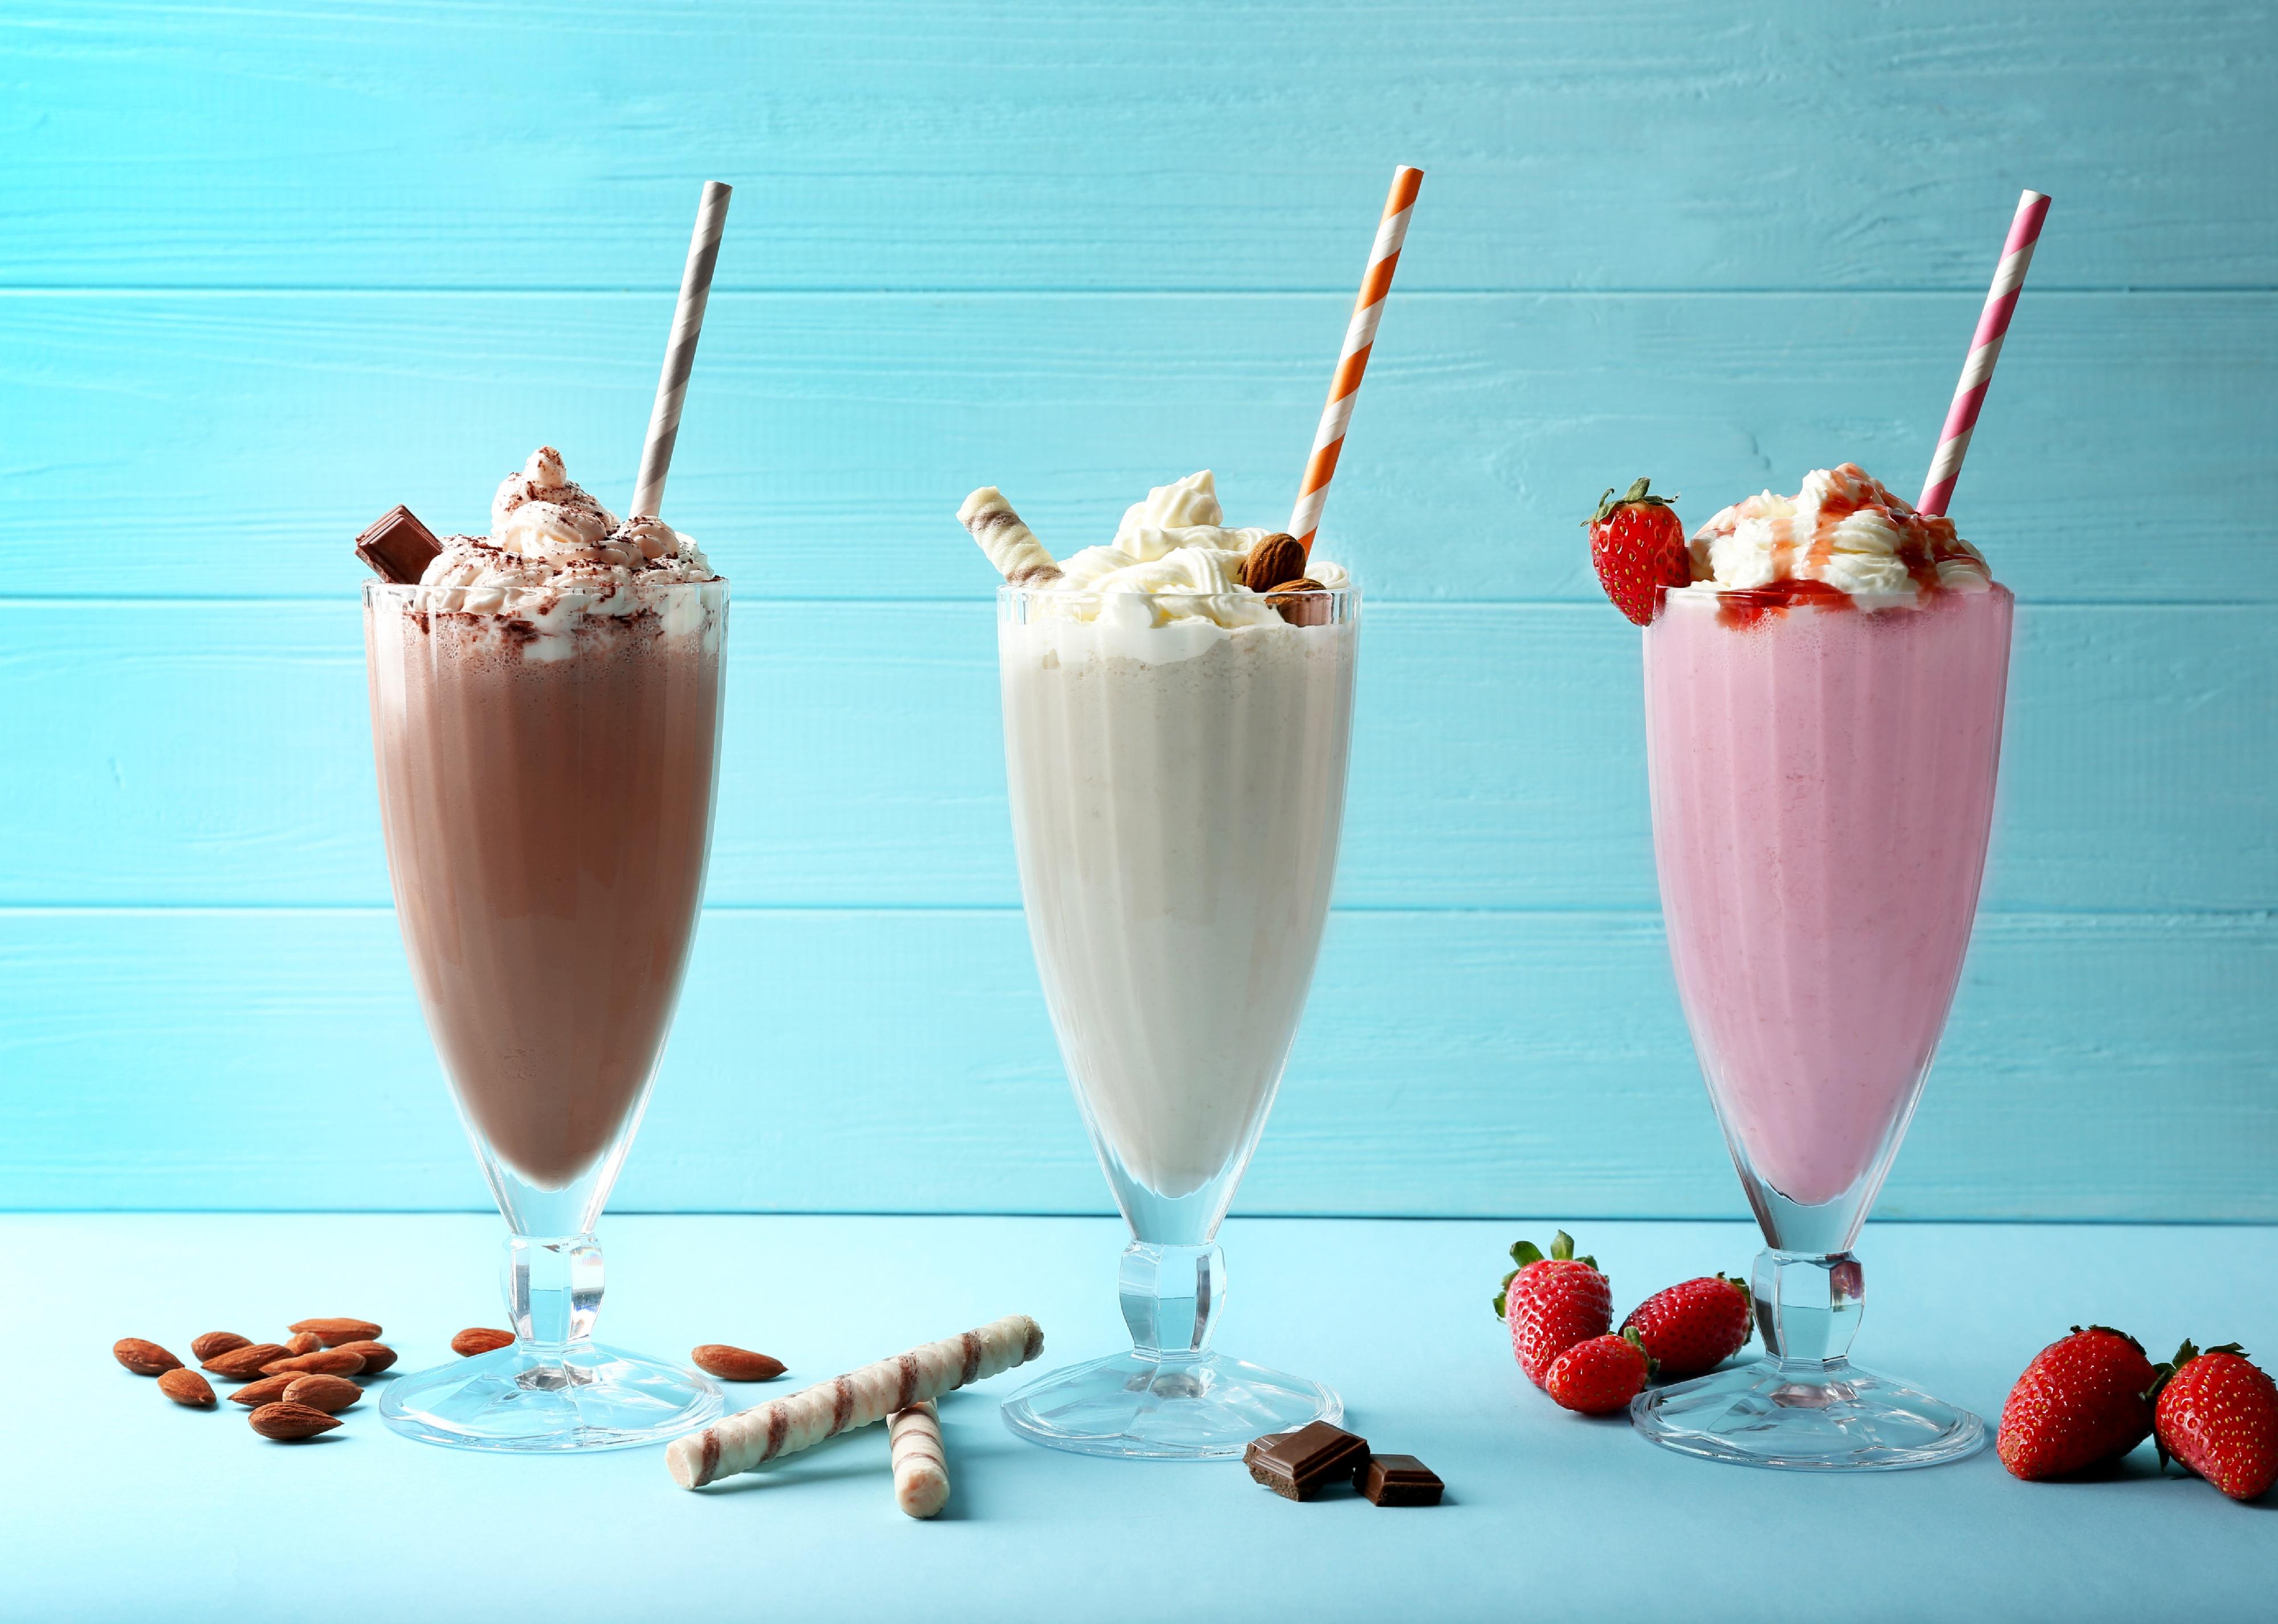 <p>"<a href="https://www.insider.com/words-that-are-different-across-the-us#a-blended-drink-made-with-ice-cream-is-widely-known-as-a-milkshake-but-many-new-englanders-call-it-a-frappe-6">Milkshake</a>" is universally used across the United States, except in New England, where the same drink is referred to as a "frappe." You may still hear the term milkshake in New England, but there, it refers specifically to chocolate milk, not the blended ice cream beverage. It is unclear when and why the term frappe made its way into the Northeastern lexicon, but it is speculated that <a href="https://patch.com/massachusetts/boston/only-massachusetts-why-milkshake-called-frappe">French Canadian workers</a> in New Hampshire and Massachusetts may have had an influence.</p>